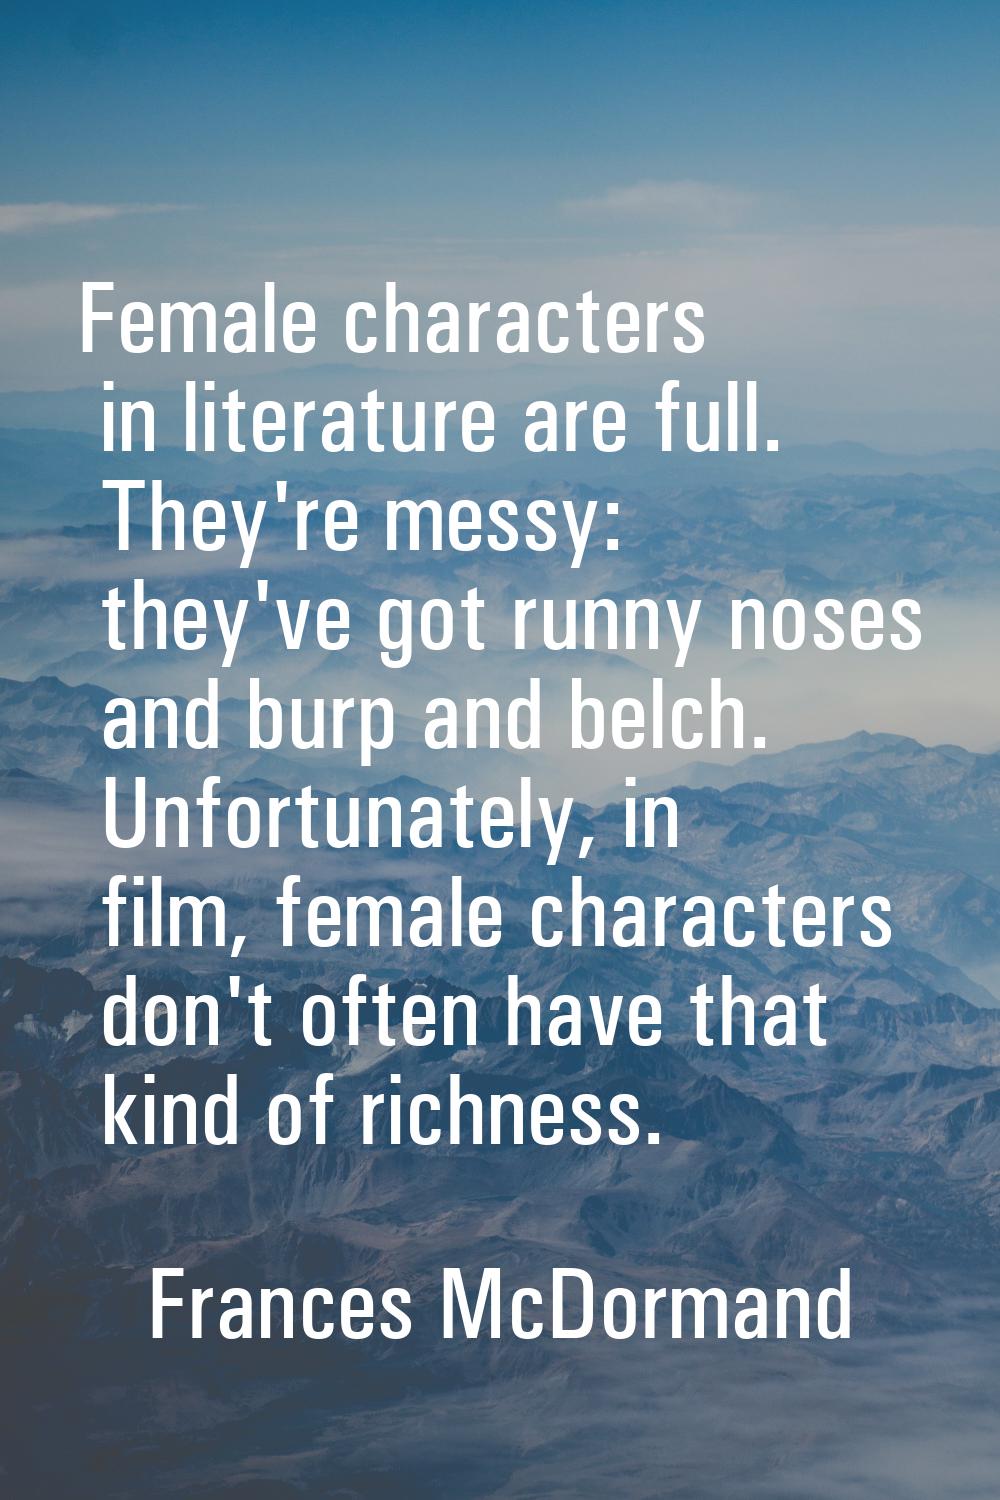 Female characters in literature are full. They're messy: they've got runny noses and burp and belch